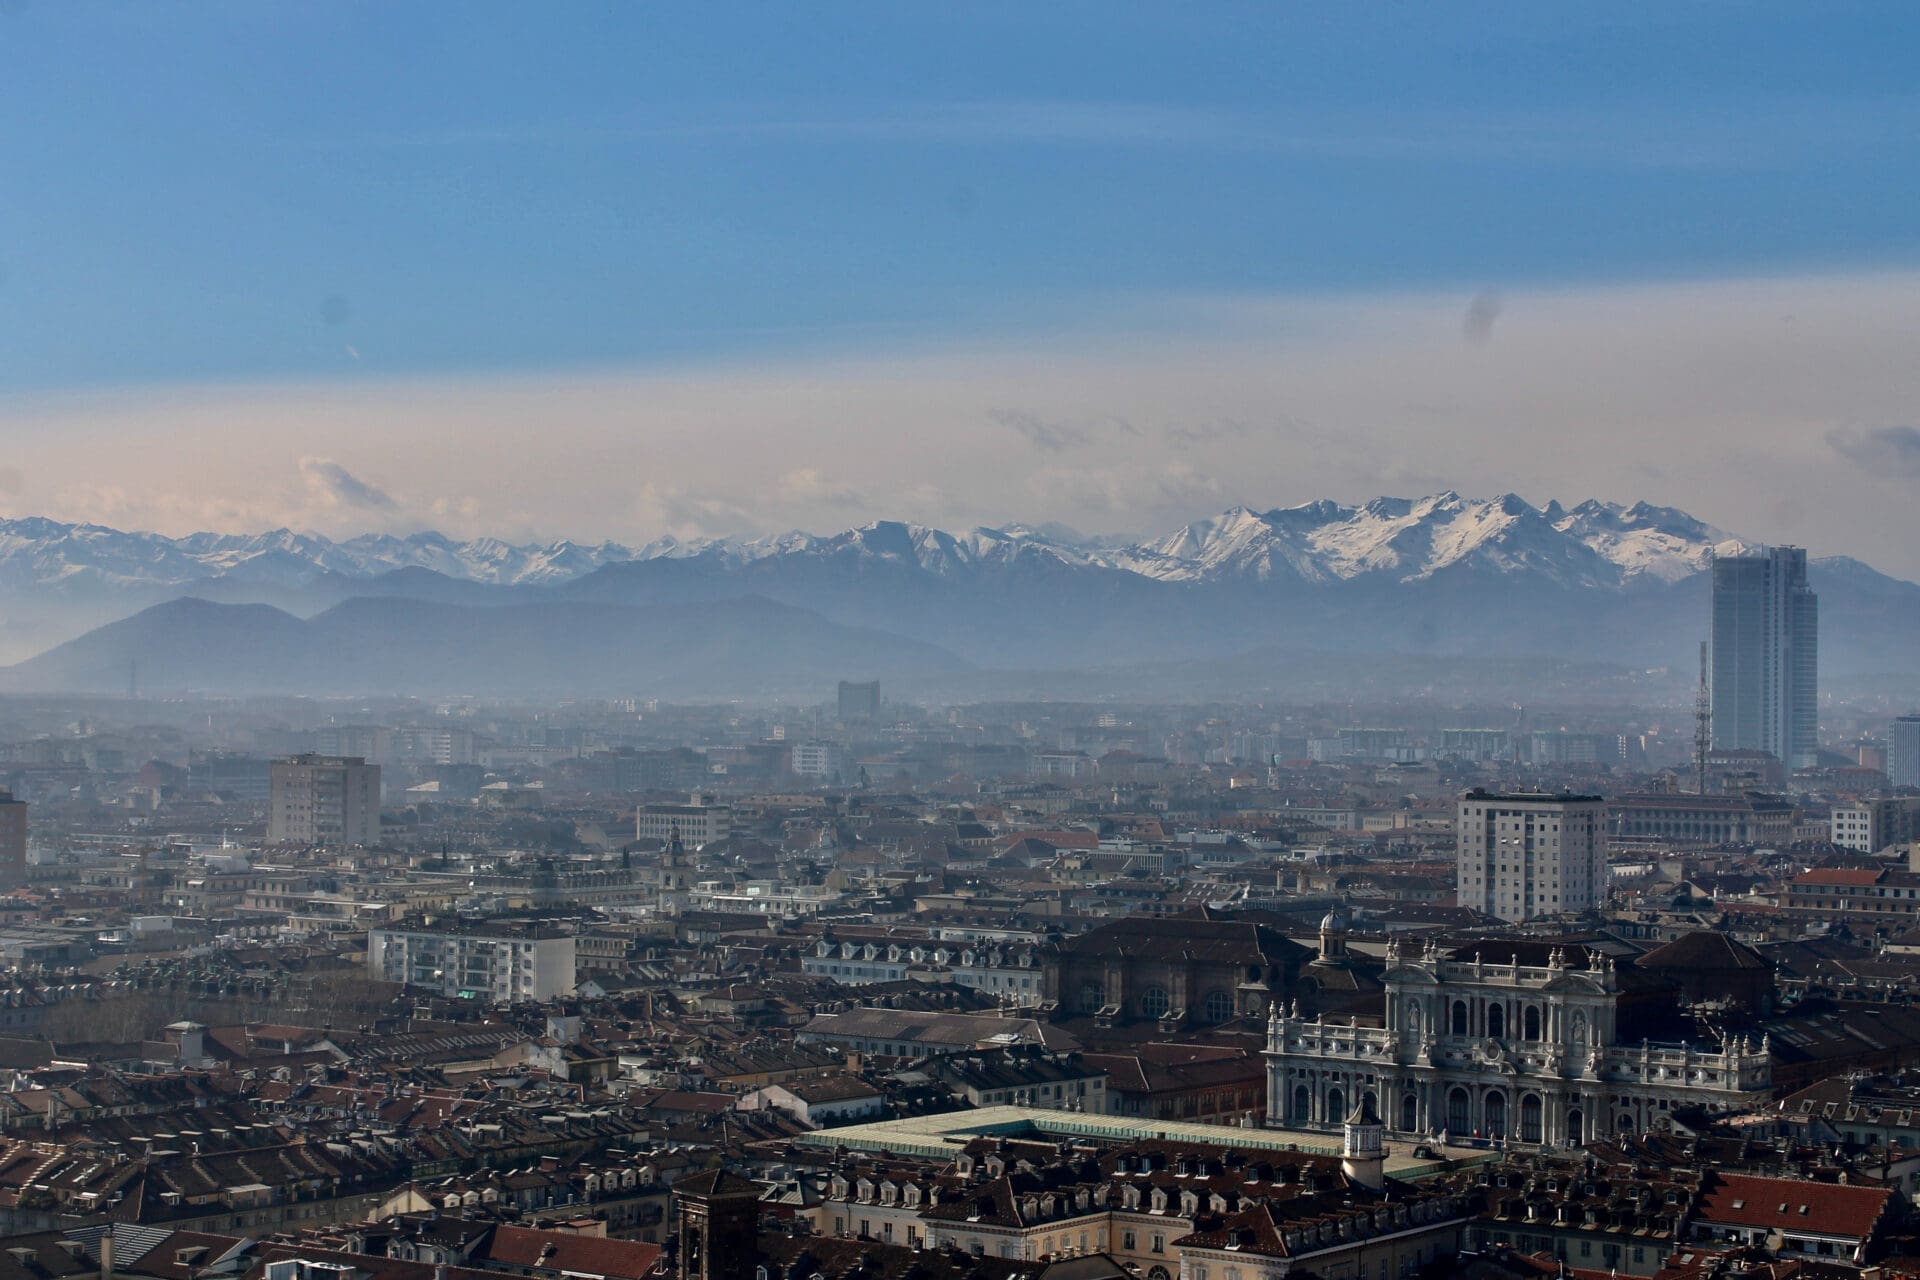 Cultural tours for the modern age | A view over a city with snow-capped peaks in the background